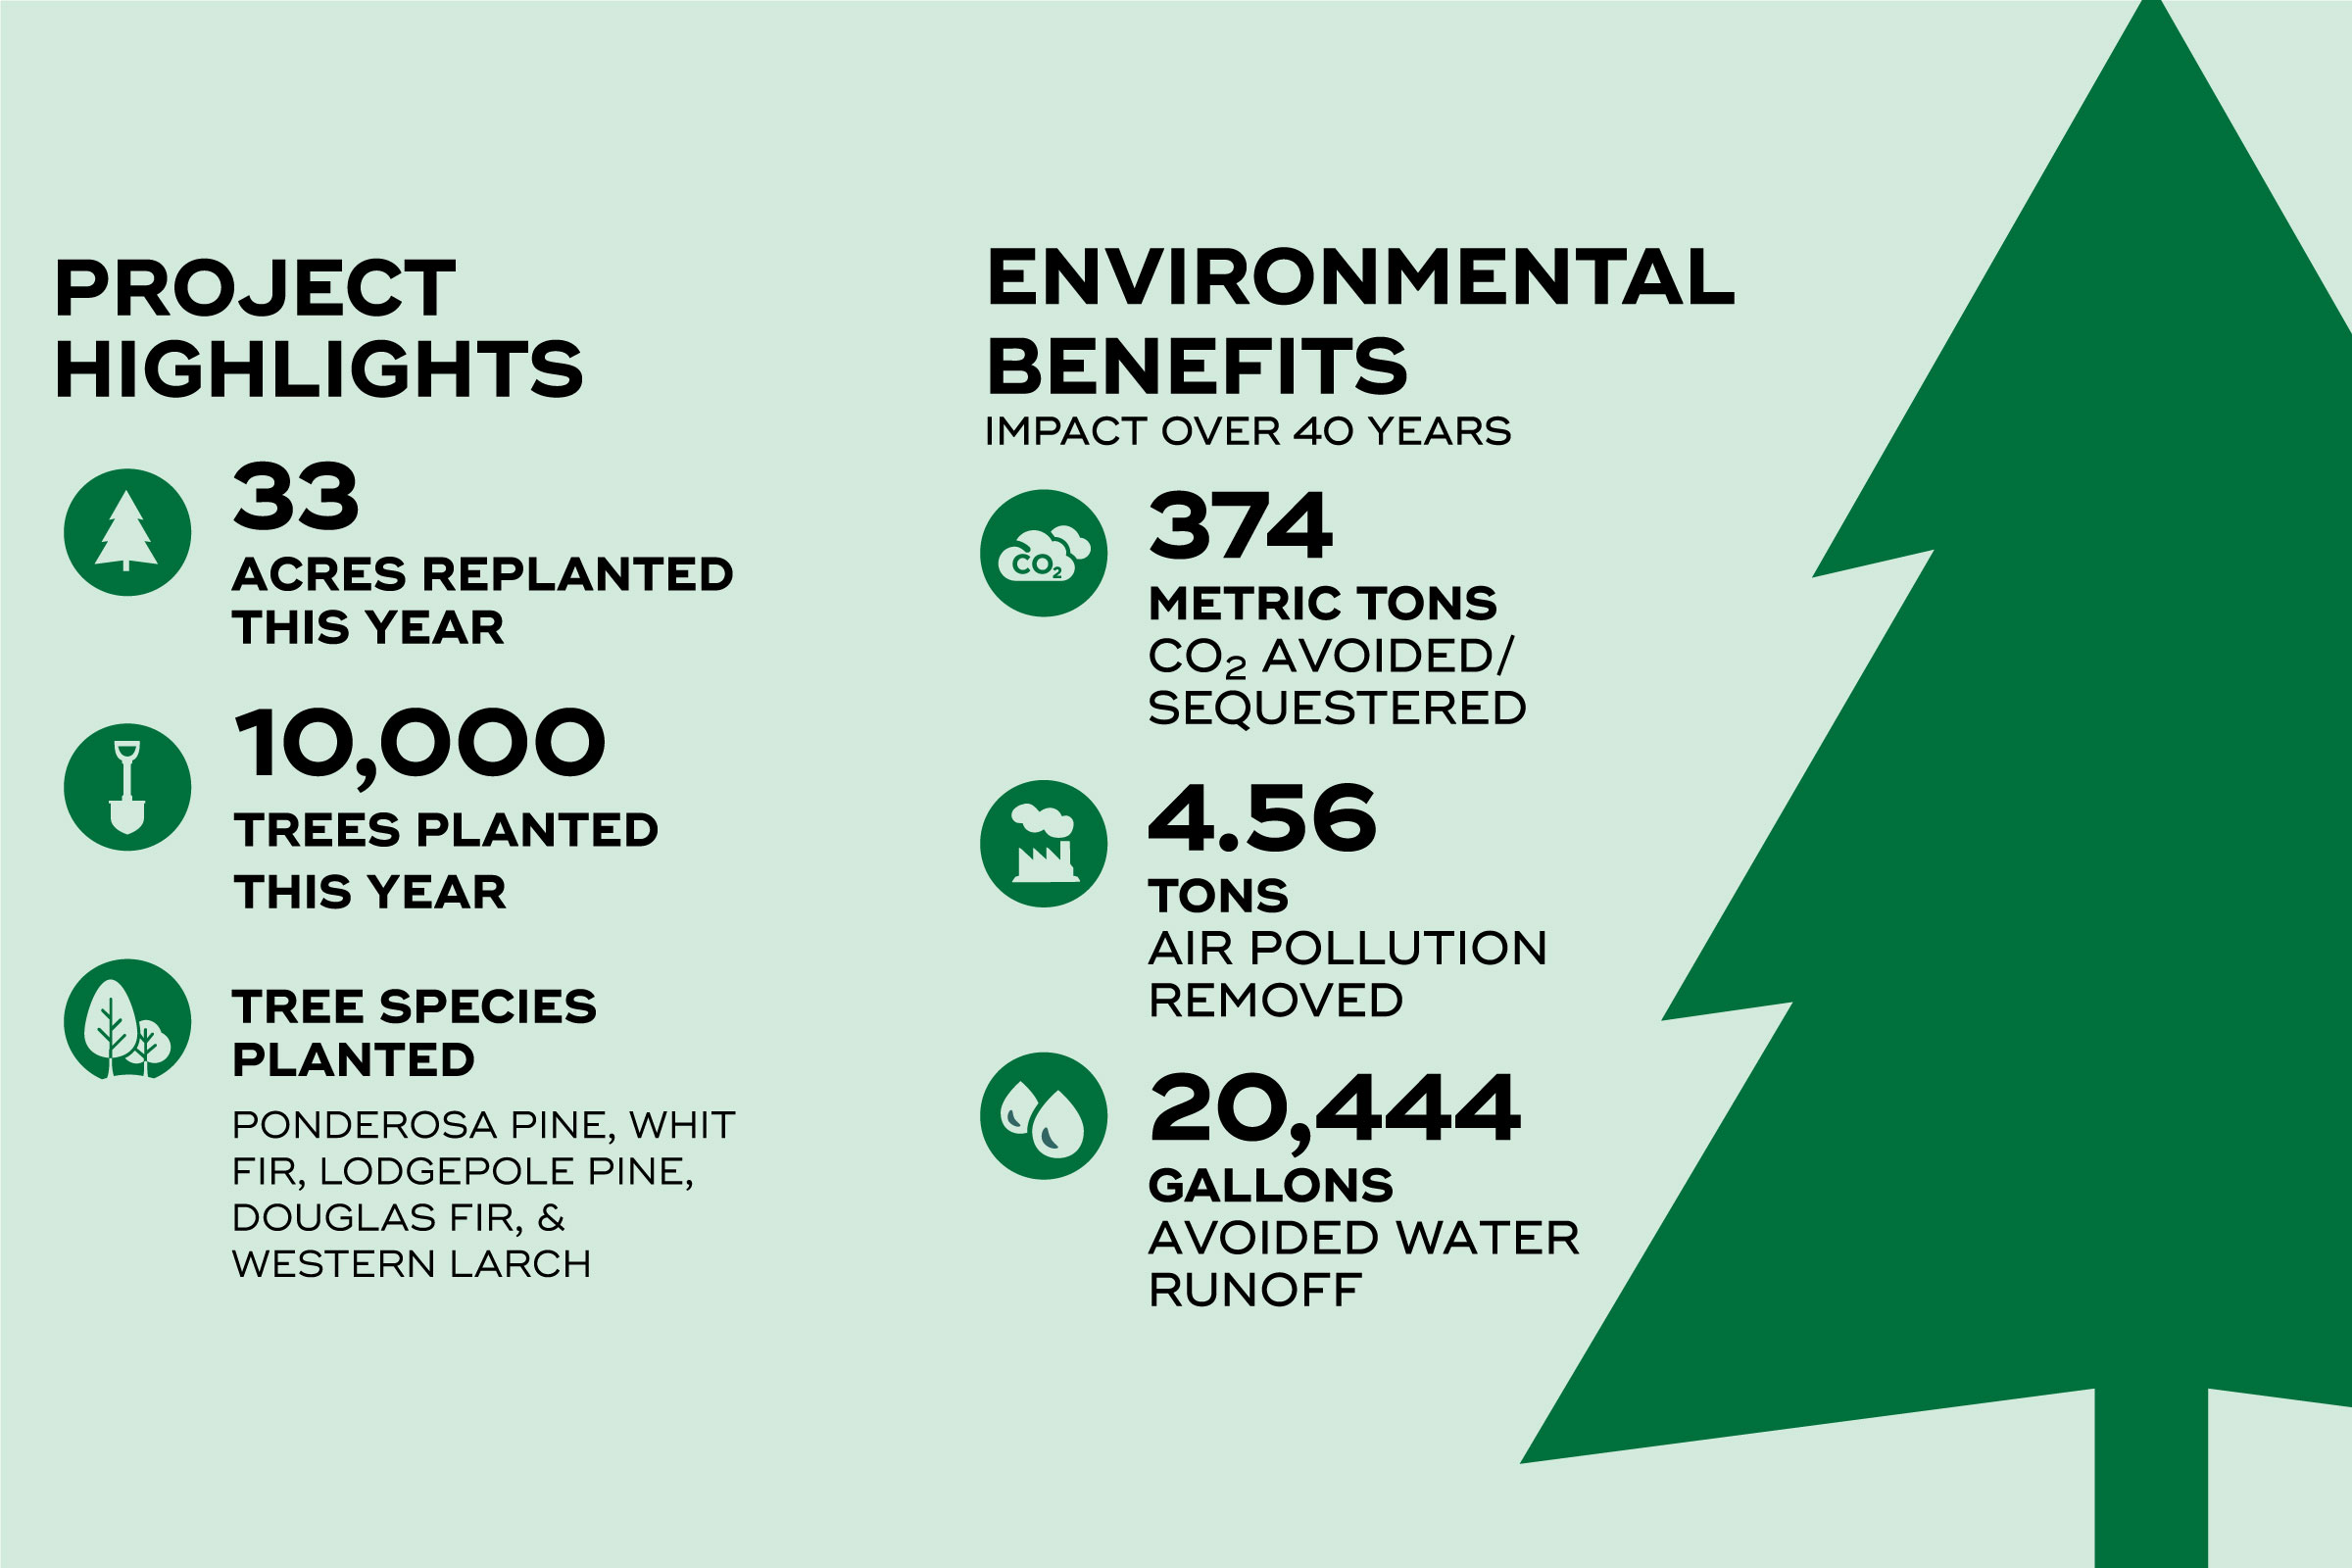 2023 Project Highlights infographic. 33 Acres replanted this year. 10,000 trees planted this year. Tree Species Planted: Ponderosa Pine, White Fir, Lodgepole Pine, Douglas Fir, Western Larch. Environmental Benefits impact over 40 years: 374 Metric Tons CO2 Avoided/Sequestered, 4.56 Air Pollution Removed. 20,444 Gallons of Water Runoff avoided. 